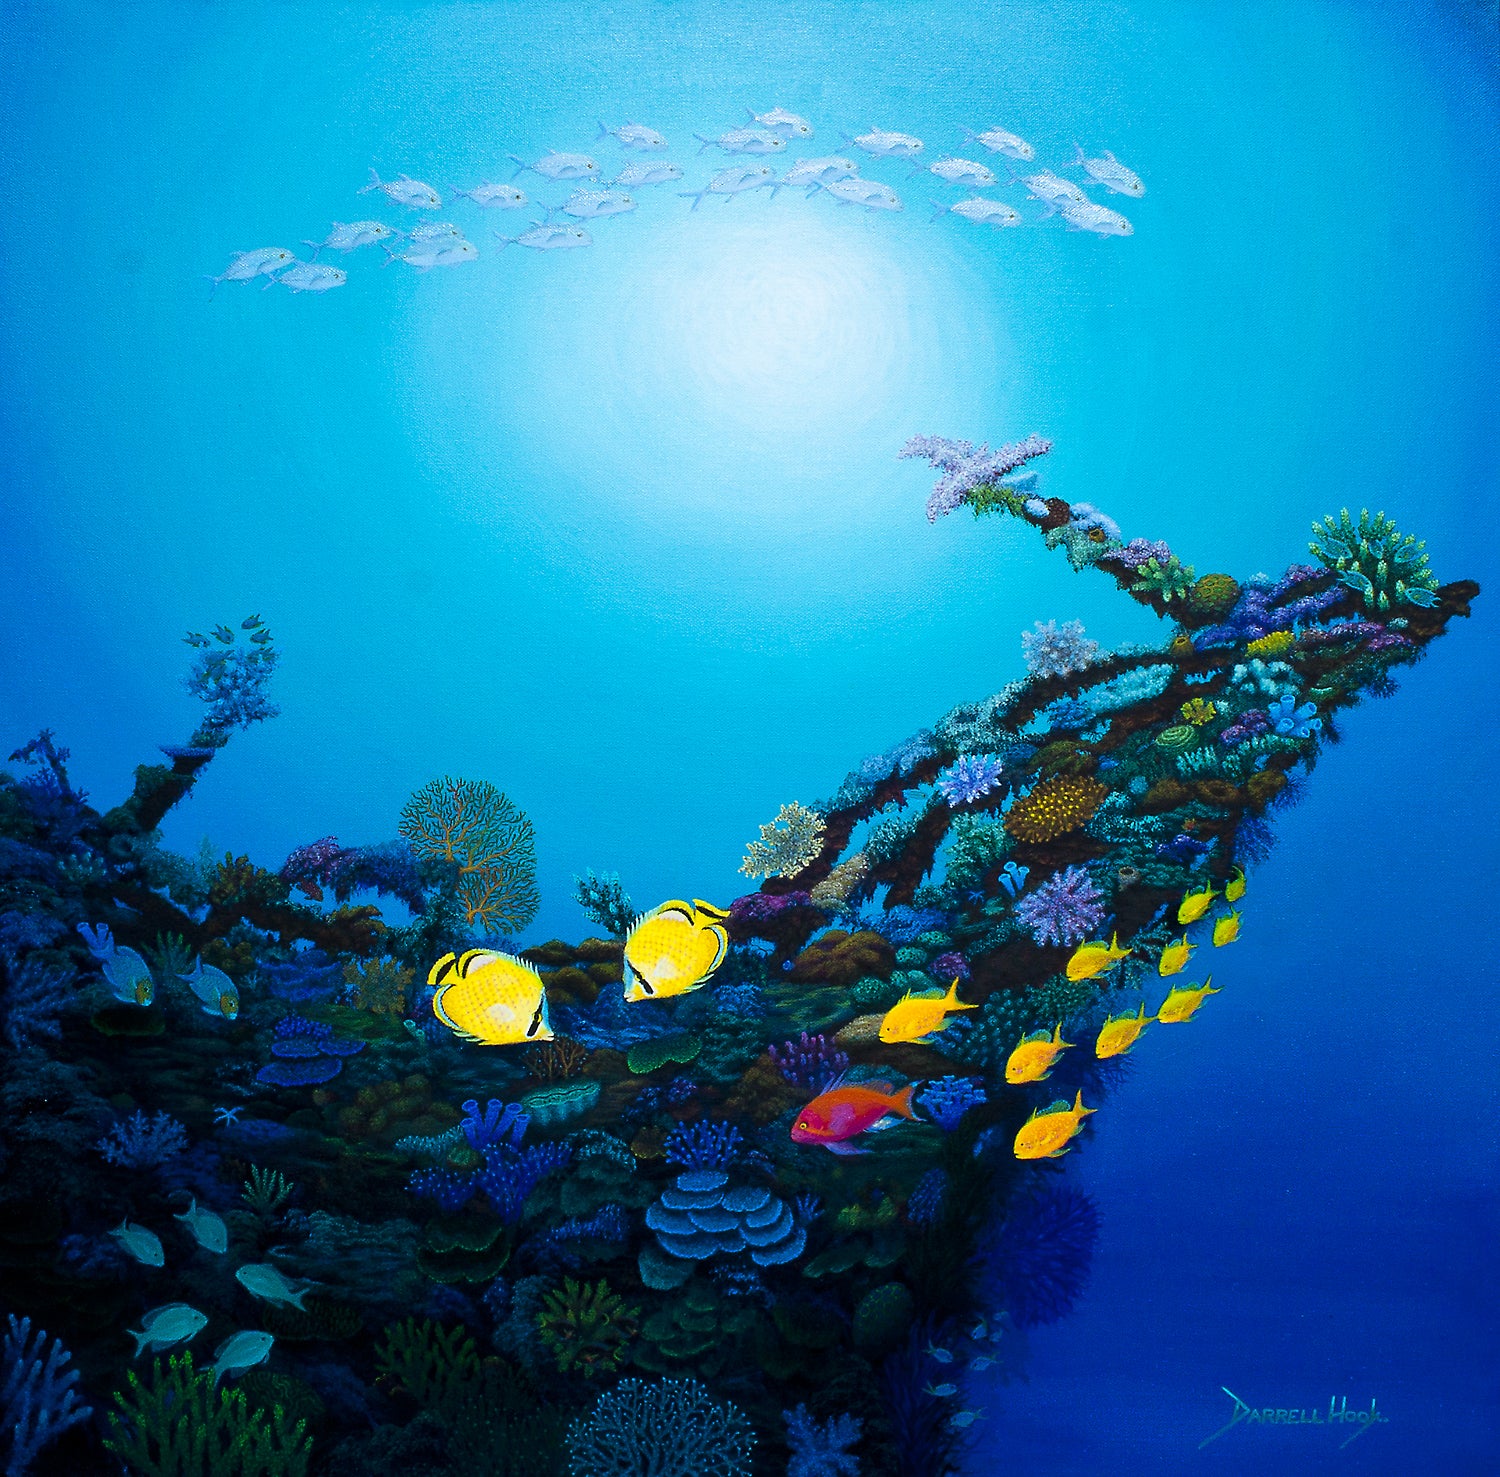 An Acrylic painting of an old shipwreck on the Reef